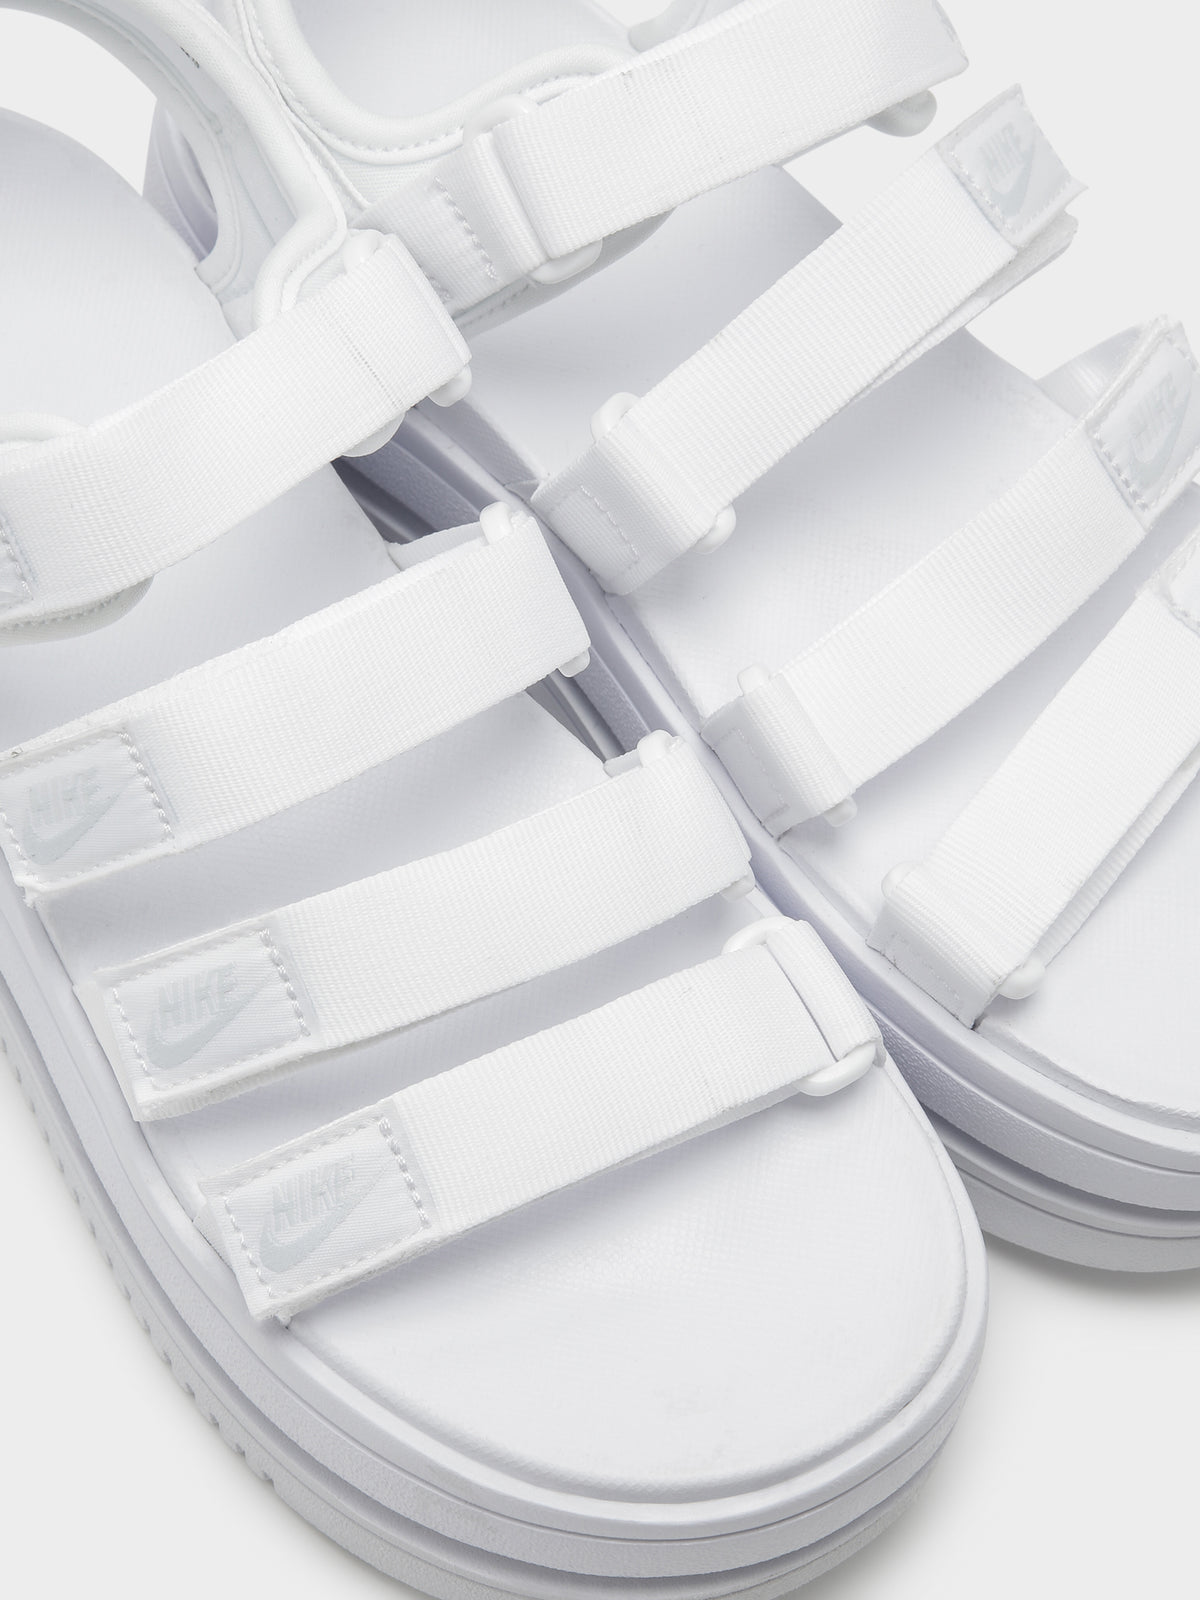 Womens Icon Classic Sandals in White